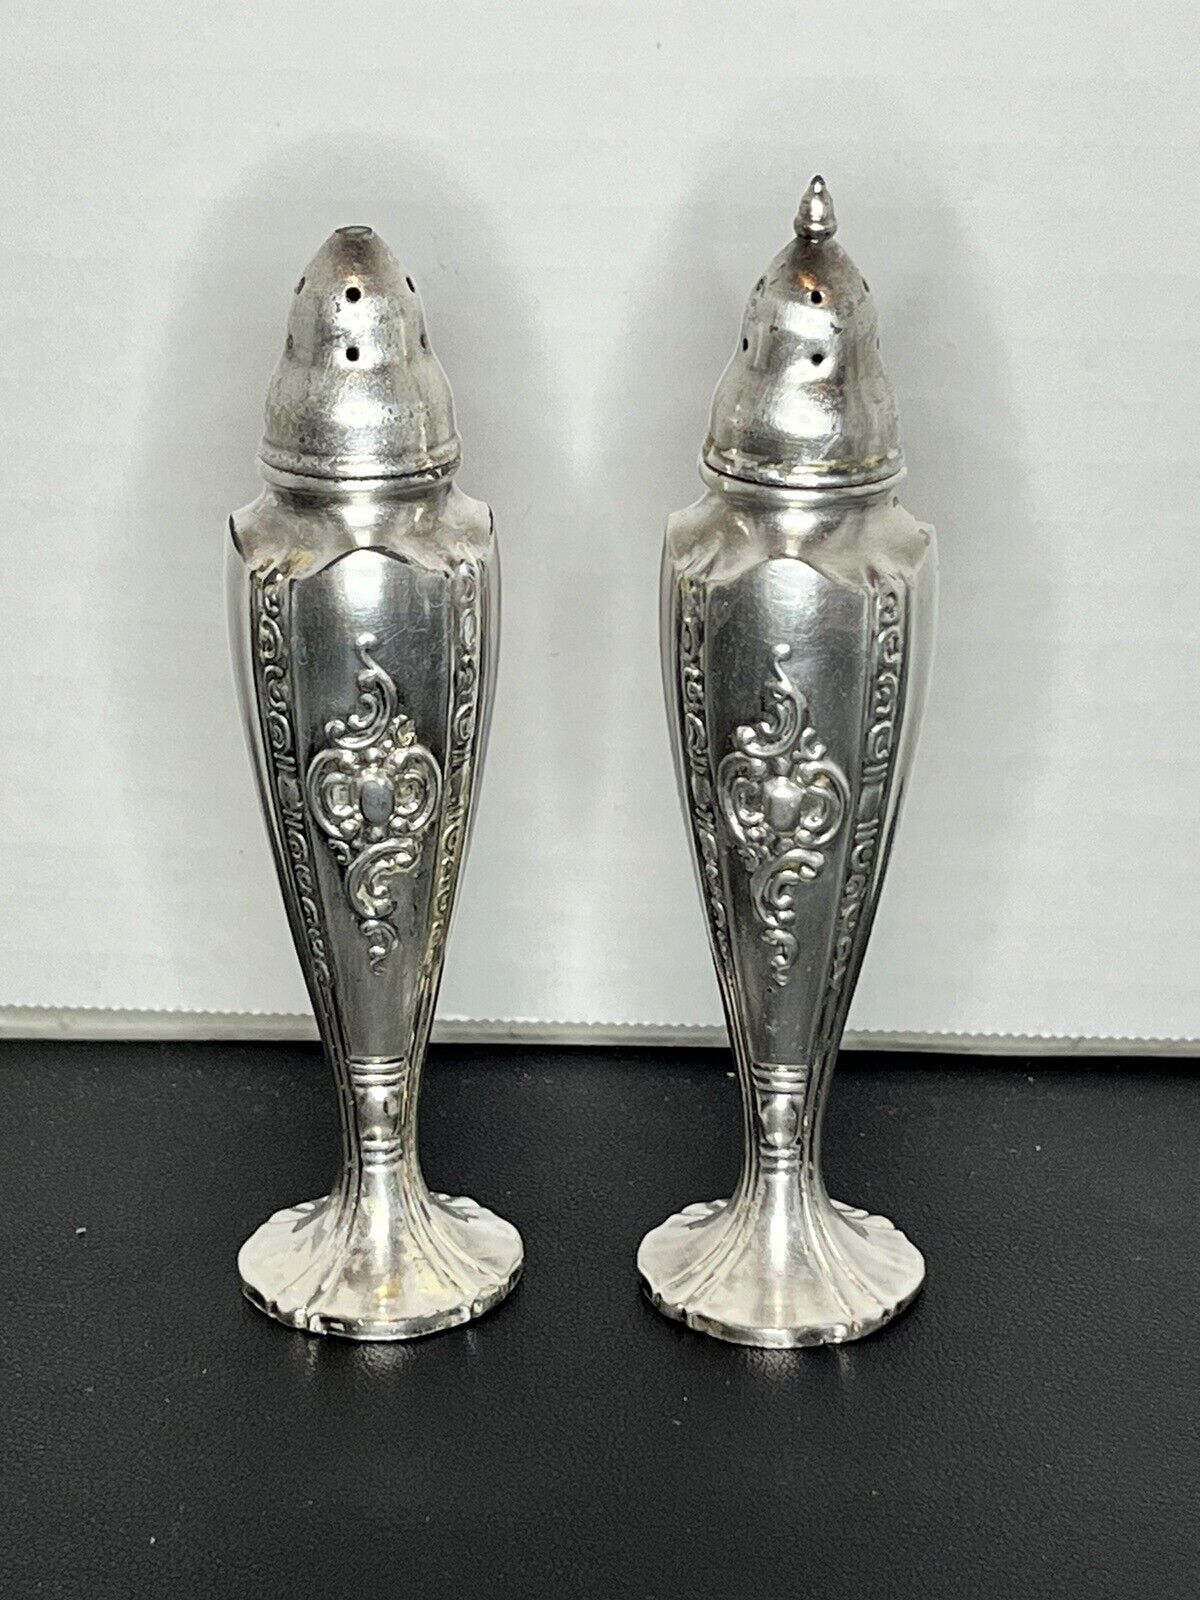 Vintage Salt & Pepper Shaker 1950’s Harmony House AA+ Maytime By Masco Silver To